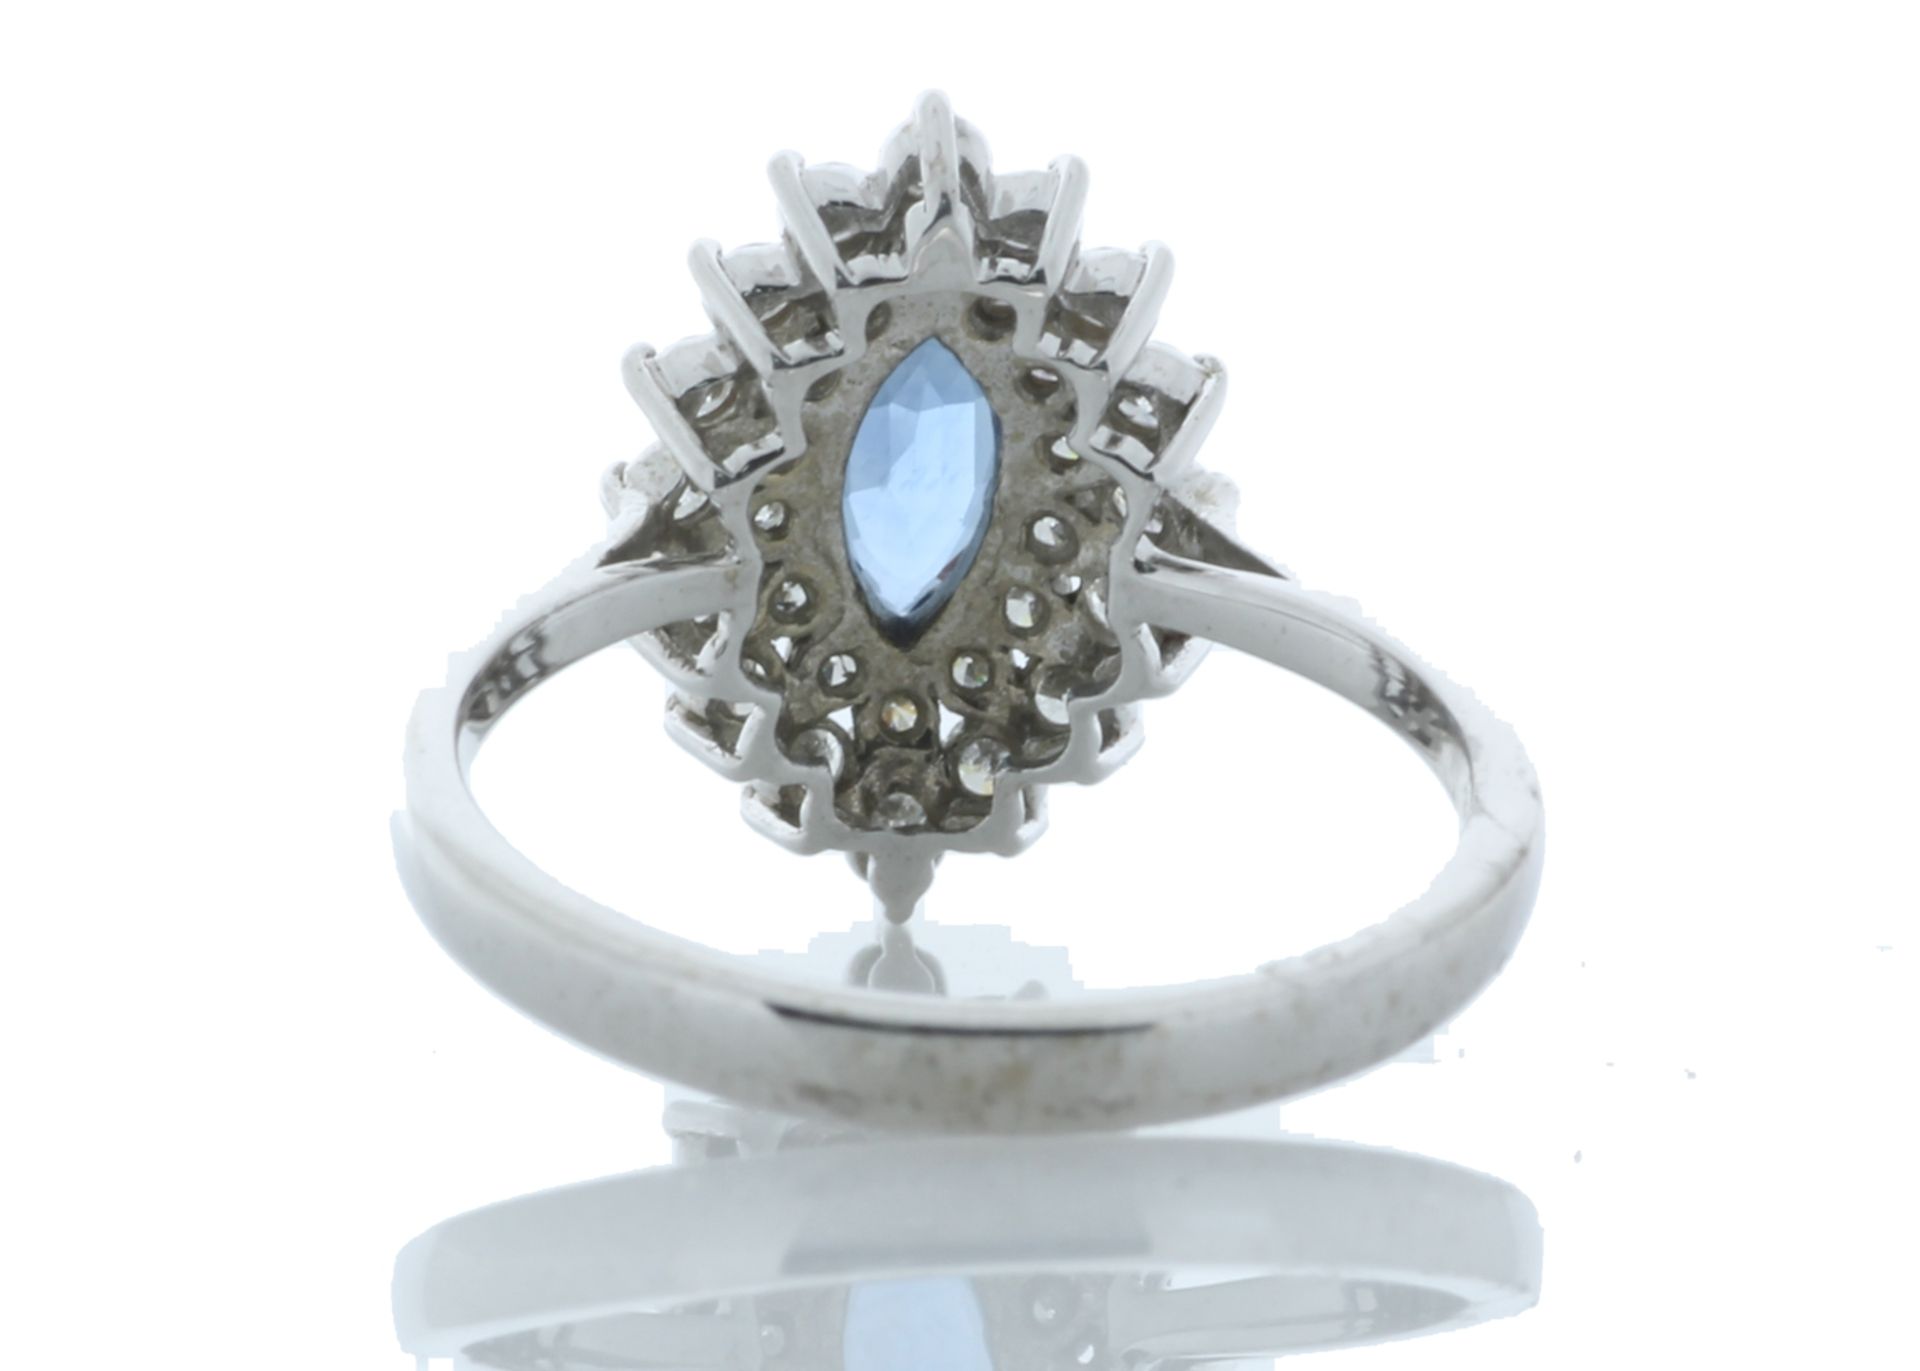 9ct White Gold Marquise Cluster Claw Set Diamond And Blue Topaz Ring 2.02 Carats - Valued by AGI £ - Image 3 of 3